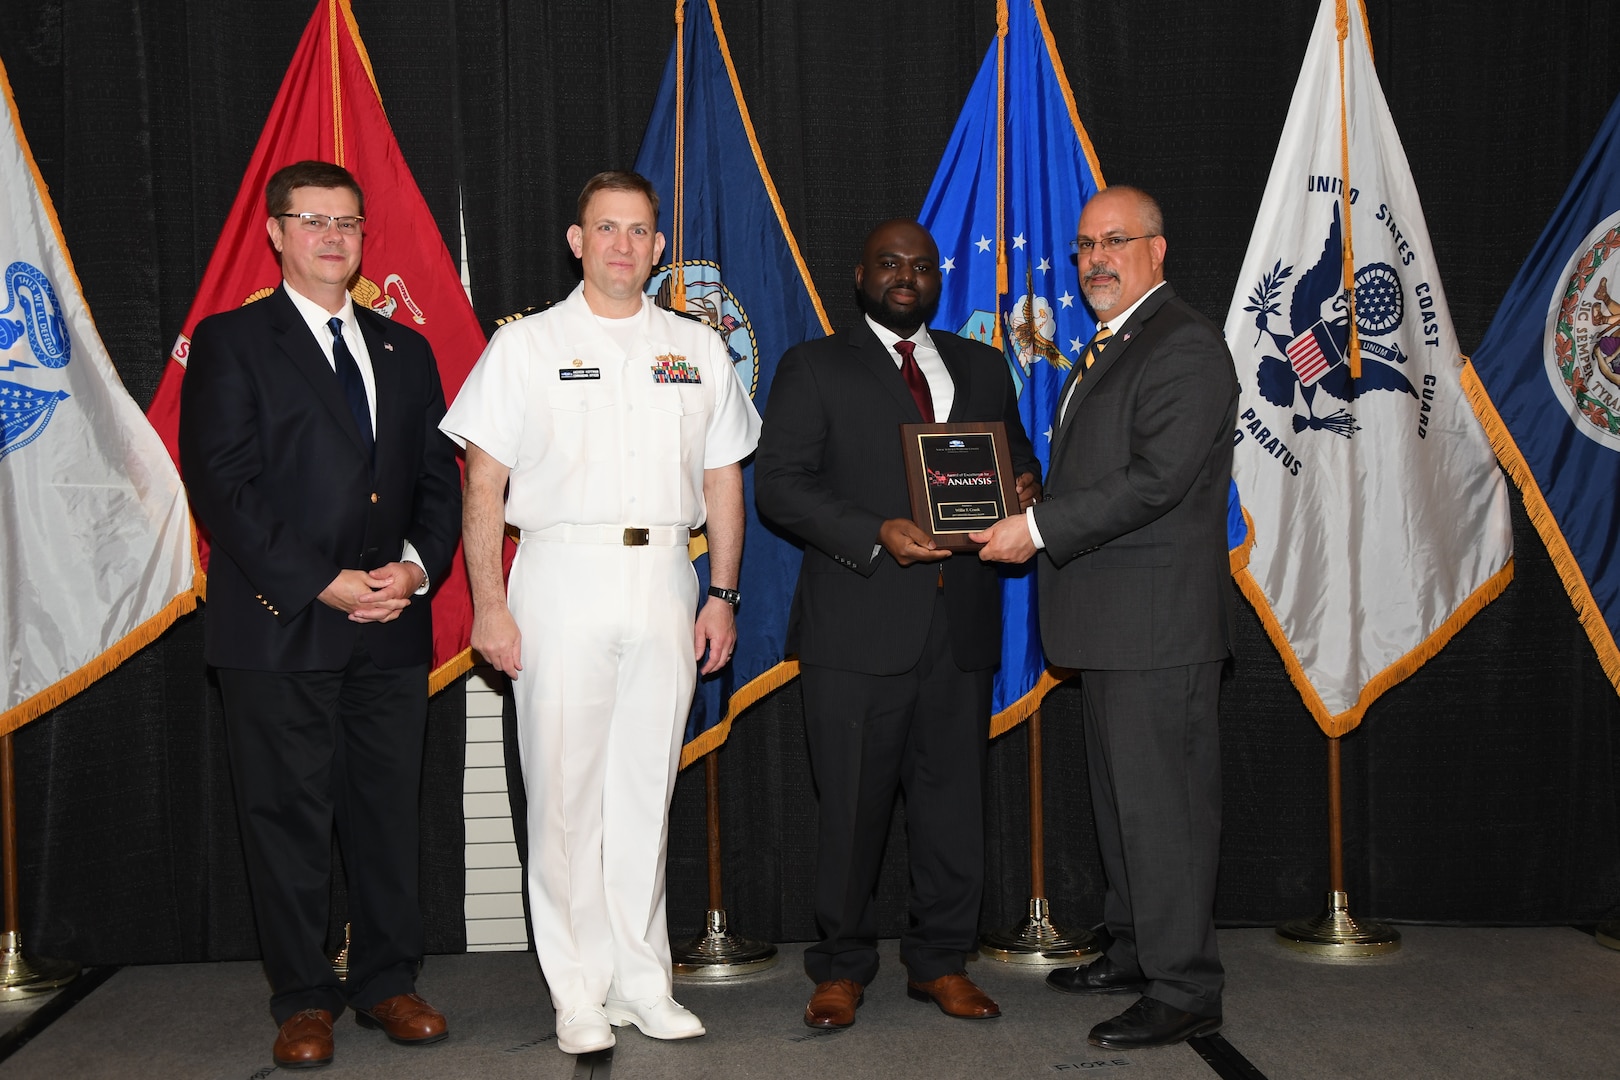 IMAGE: Willie Crank is presented the Commander's Diversity and Inclusion Award at Naval Surface Warfare Center Dahlgren Division's annual awards ceremony, Apr. 26 at the Fredericksburg Expo and Conference Center.

The NSWCDD Award of Excellence for Analysis is newly established to recognize individuals who have made a notable and significant impact to NSWCDD through their outstanding performance in analysis - warfare, design, engineering, modeling and simulation.